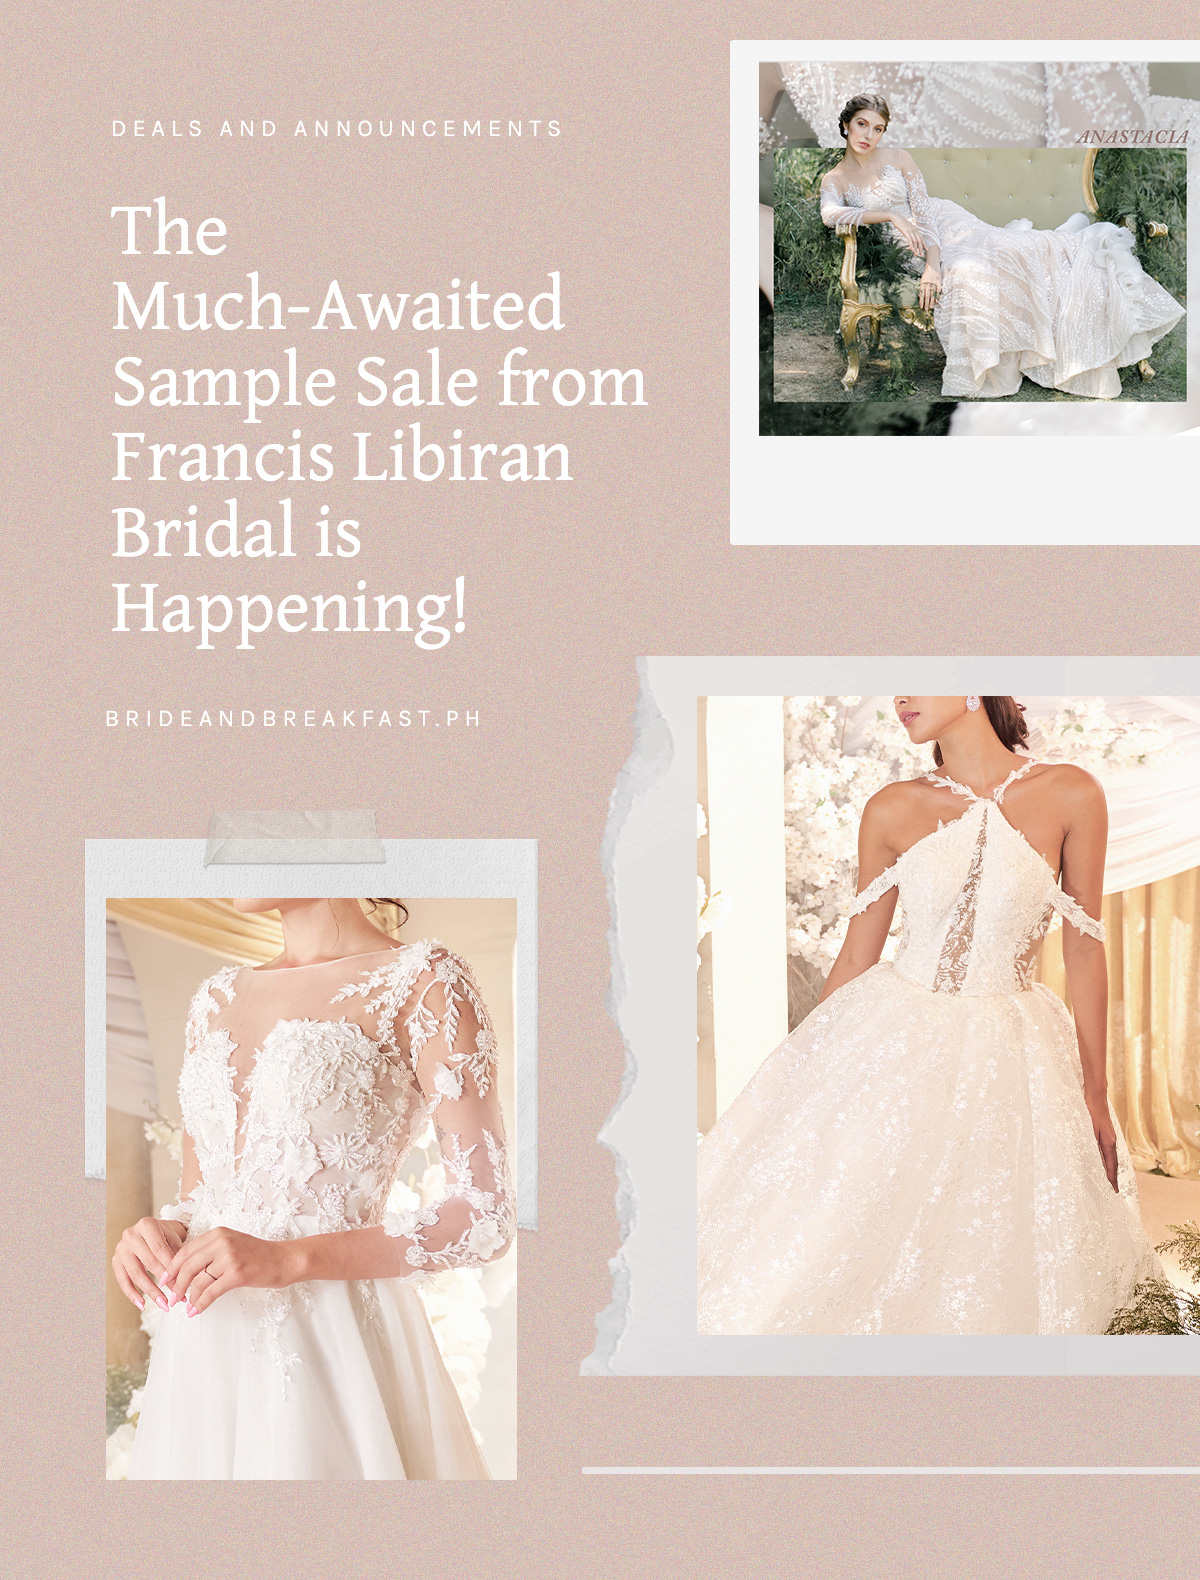 The Much-Awaited Sample Sale from Francis Libiran Bridal is Happening!